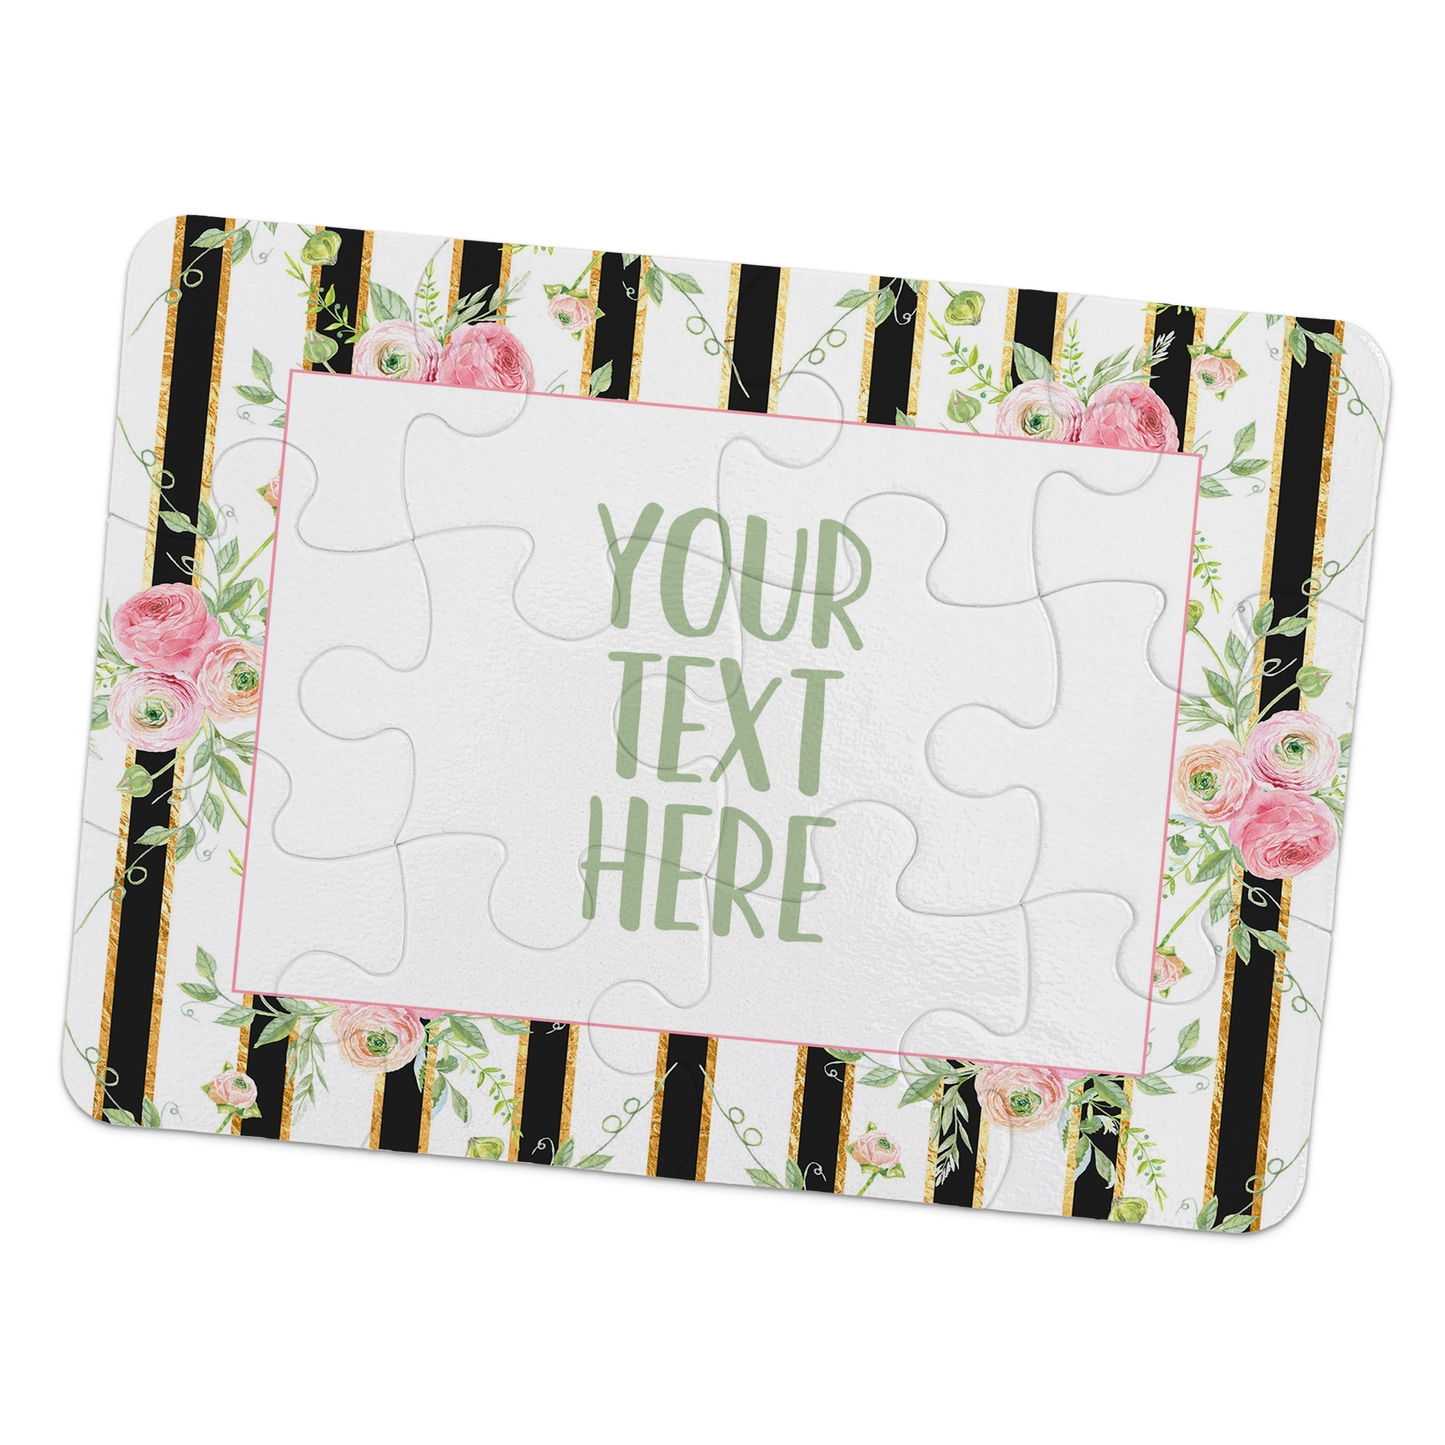 Create Your Own Puzzle - Floral Design - CYOP0052